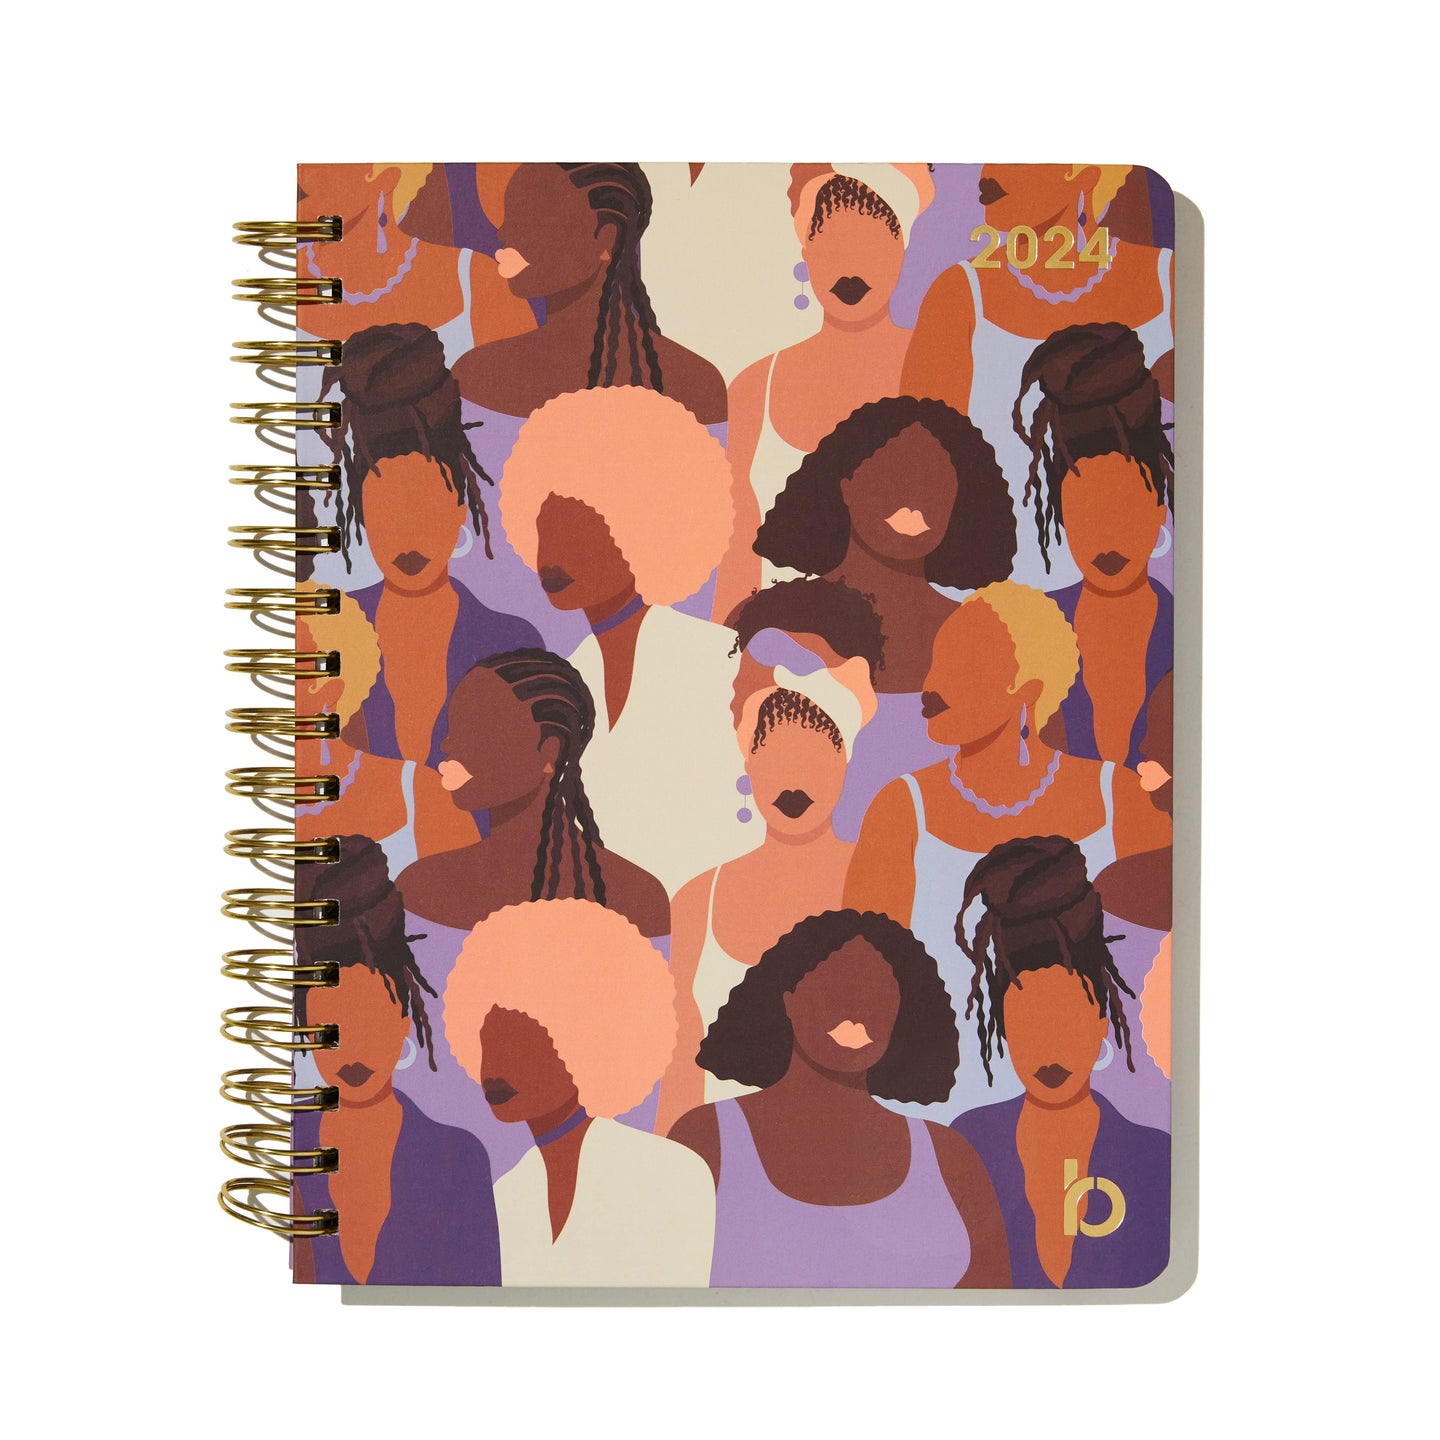 2024 Yearly Planner – Monthly/Weekly View- Stronger Together